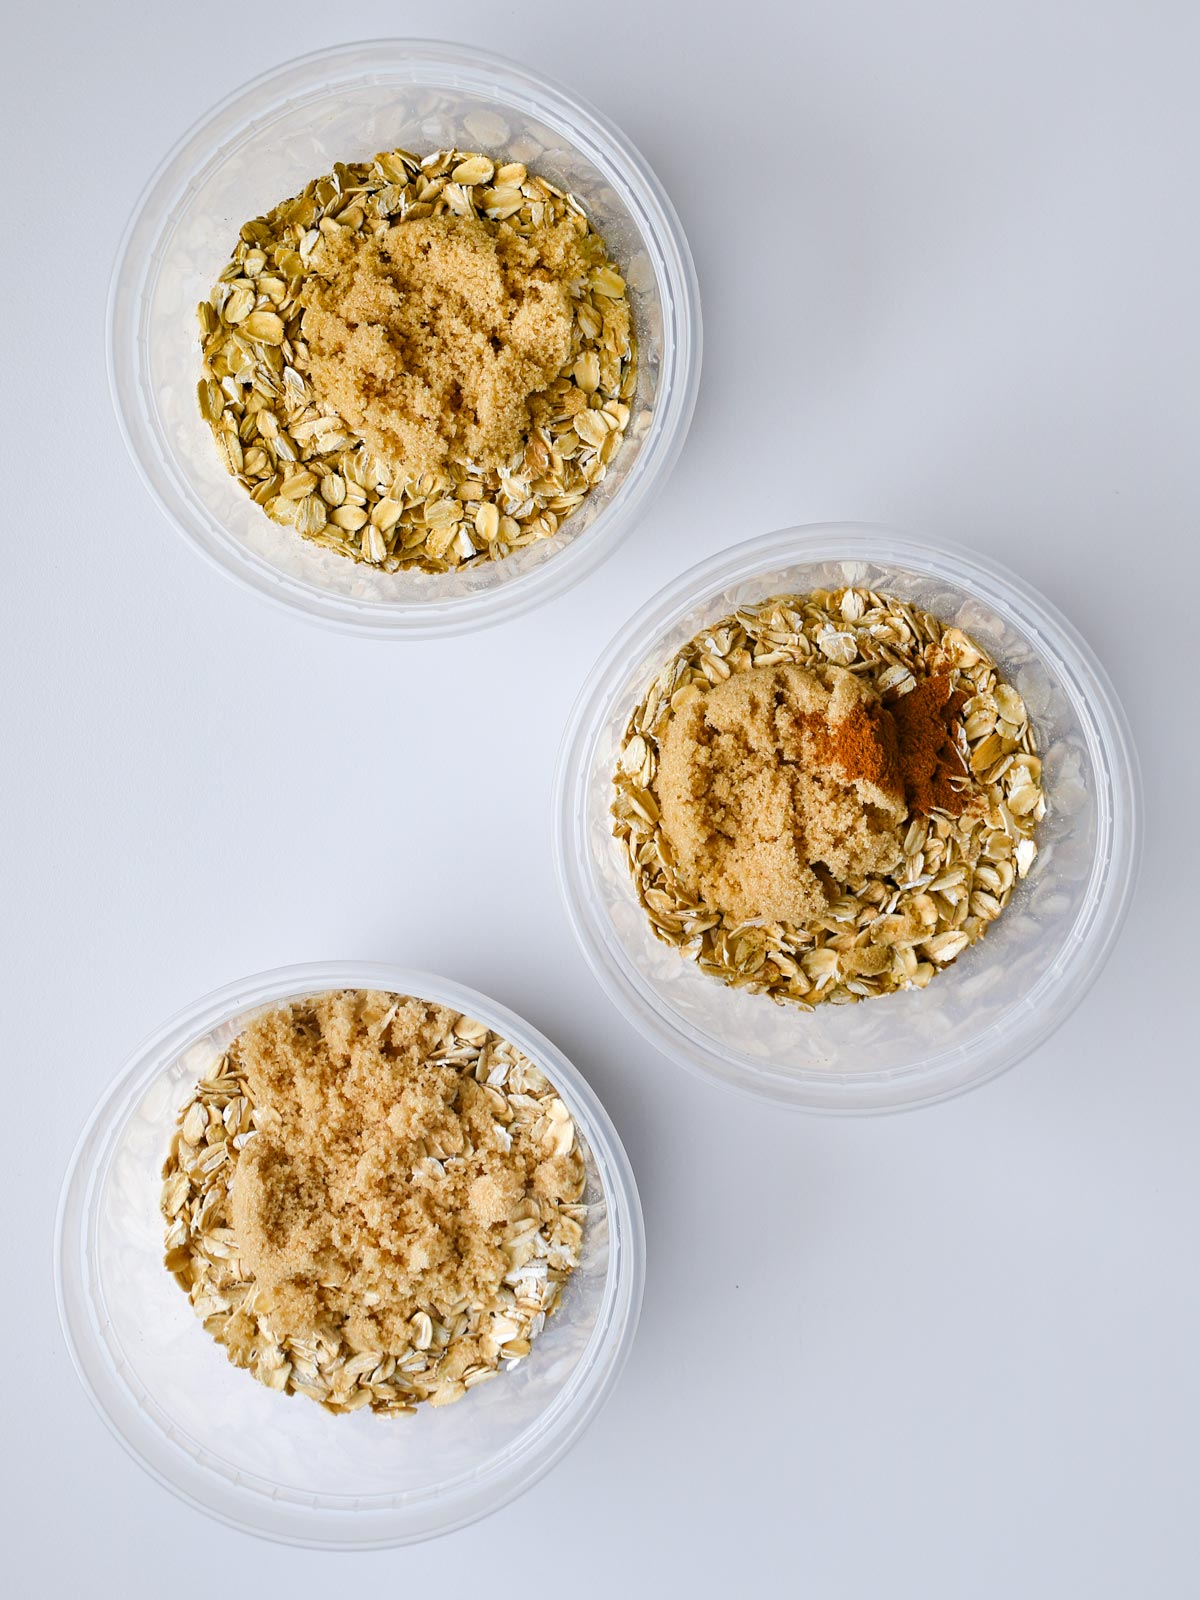 dry ingredients in small bowls.